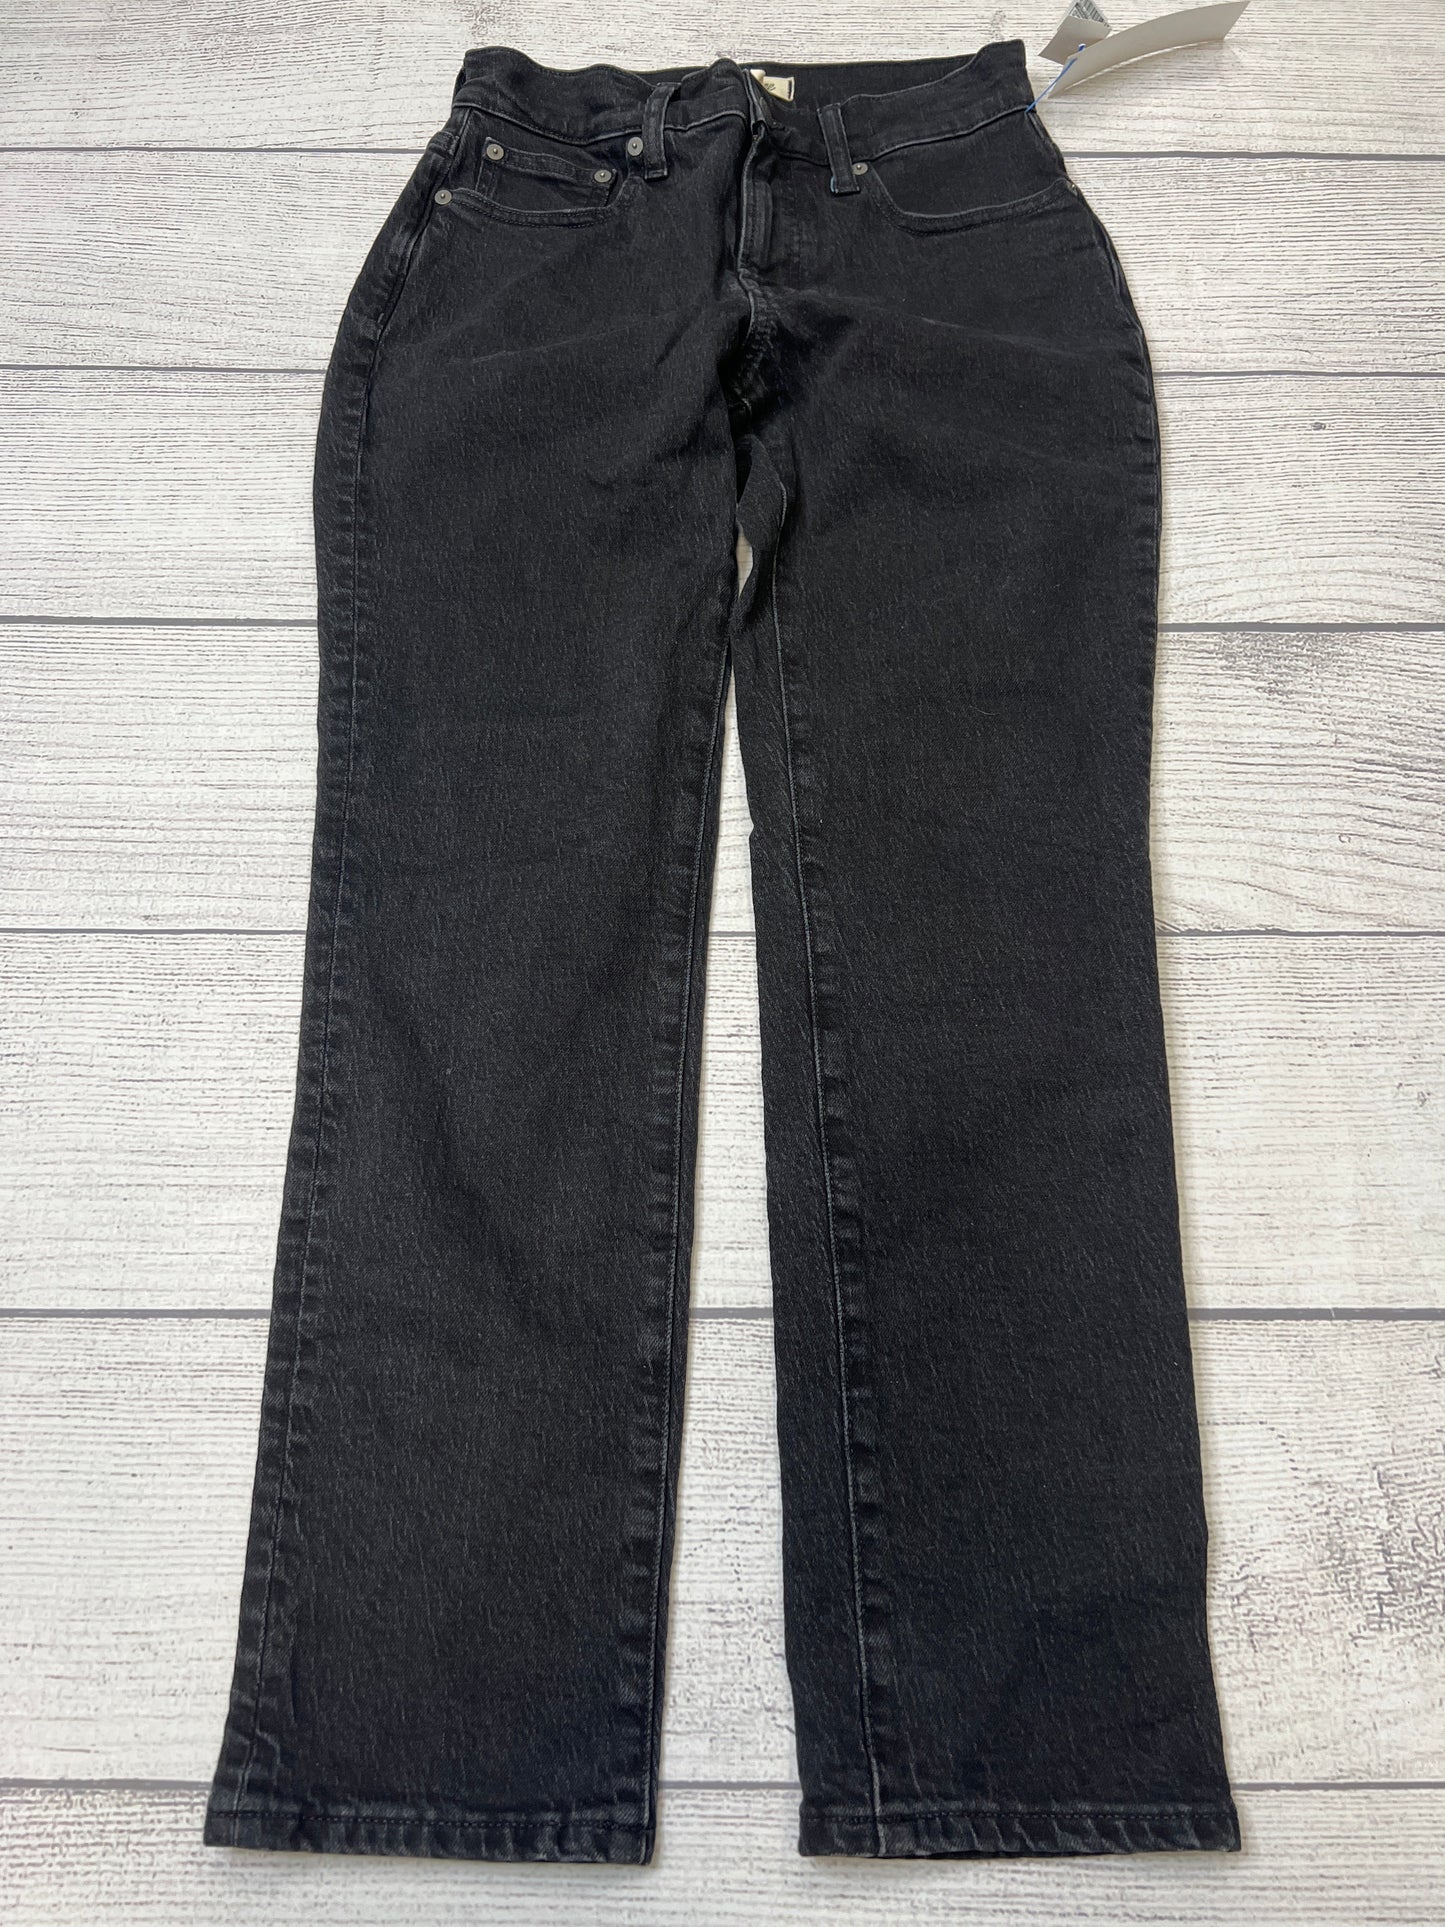 Jeans Designer By Madewell  Size: 0/25